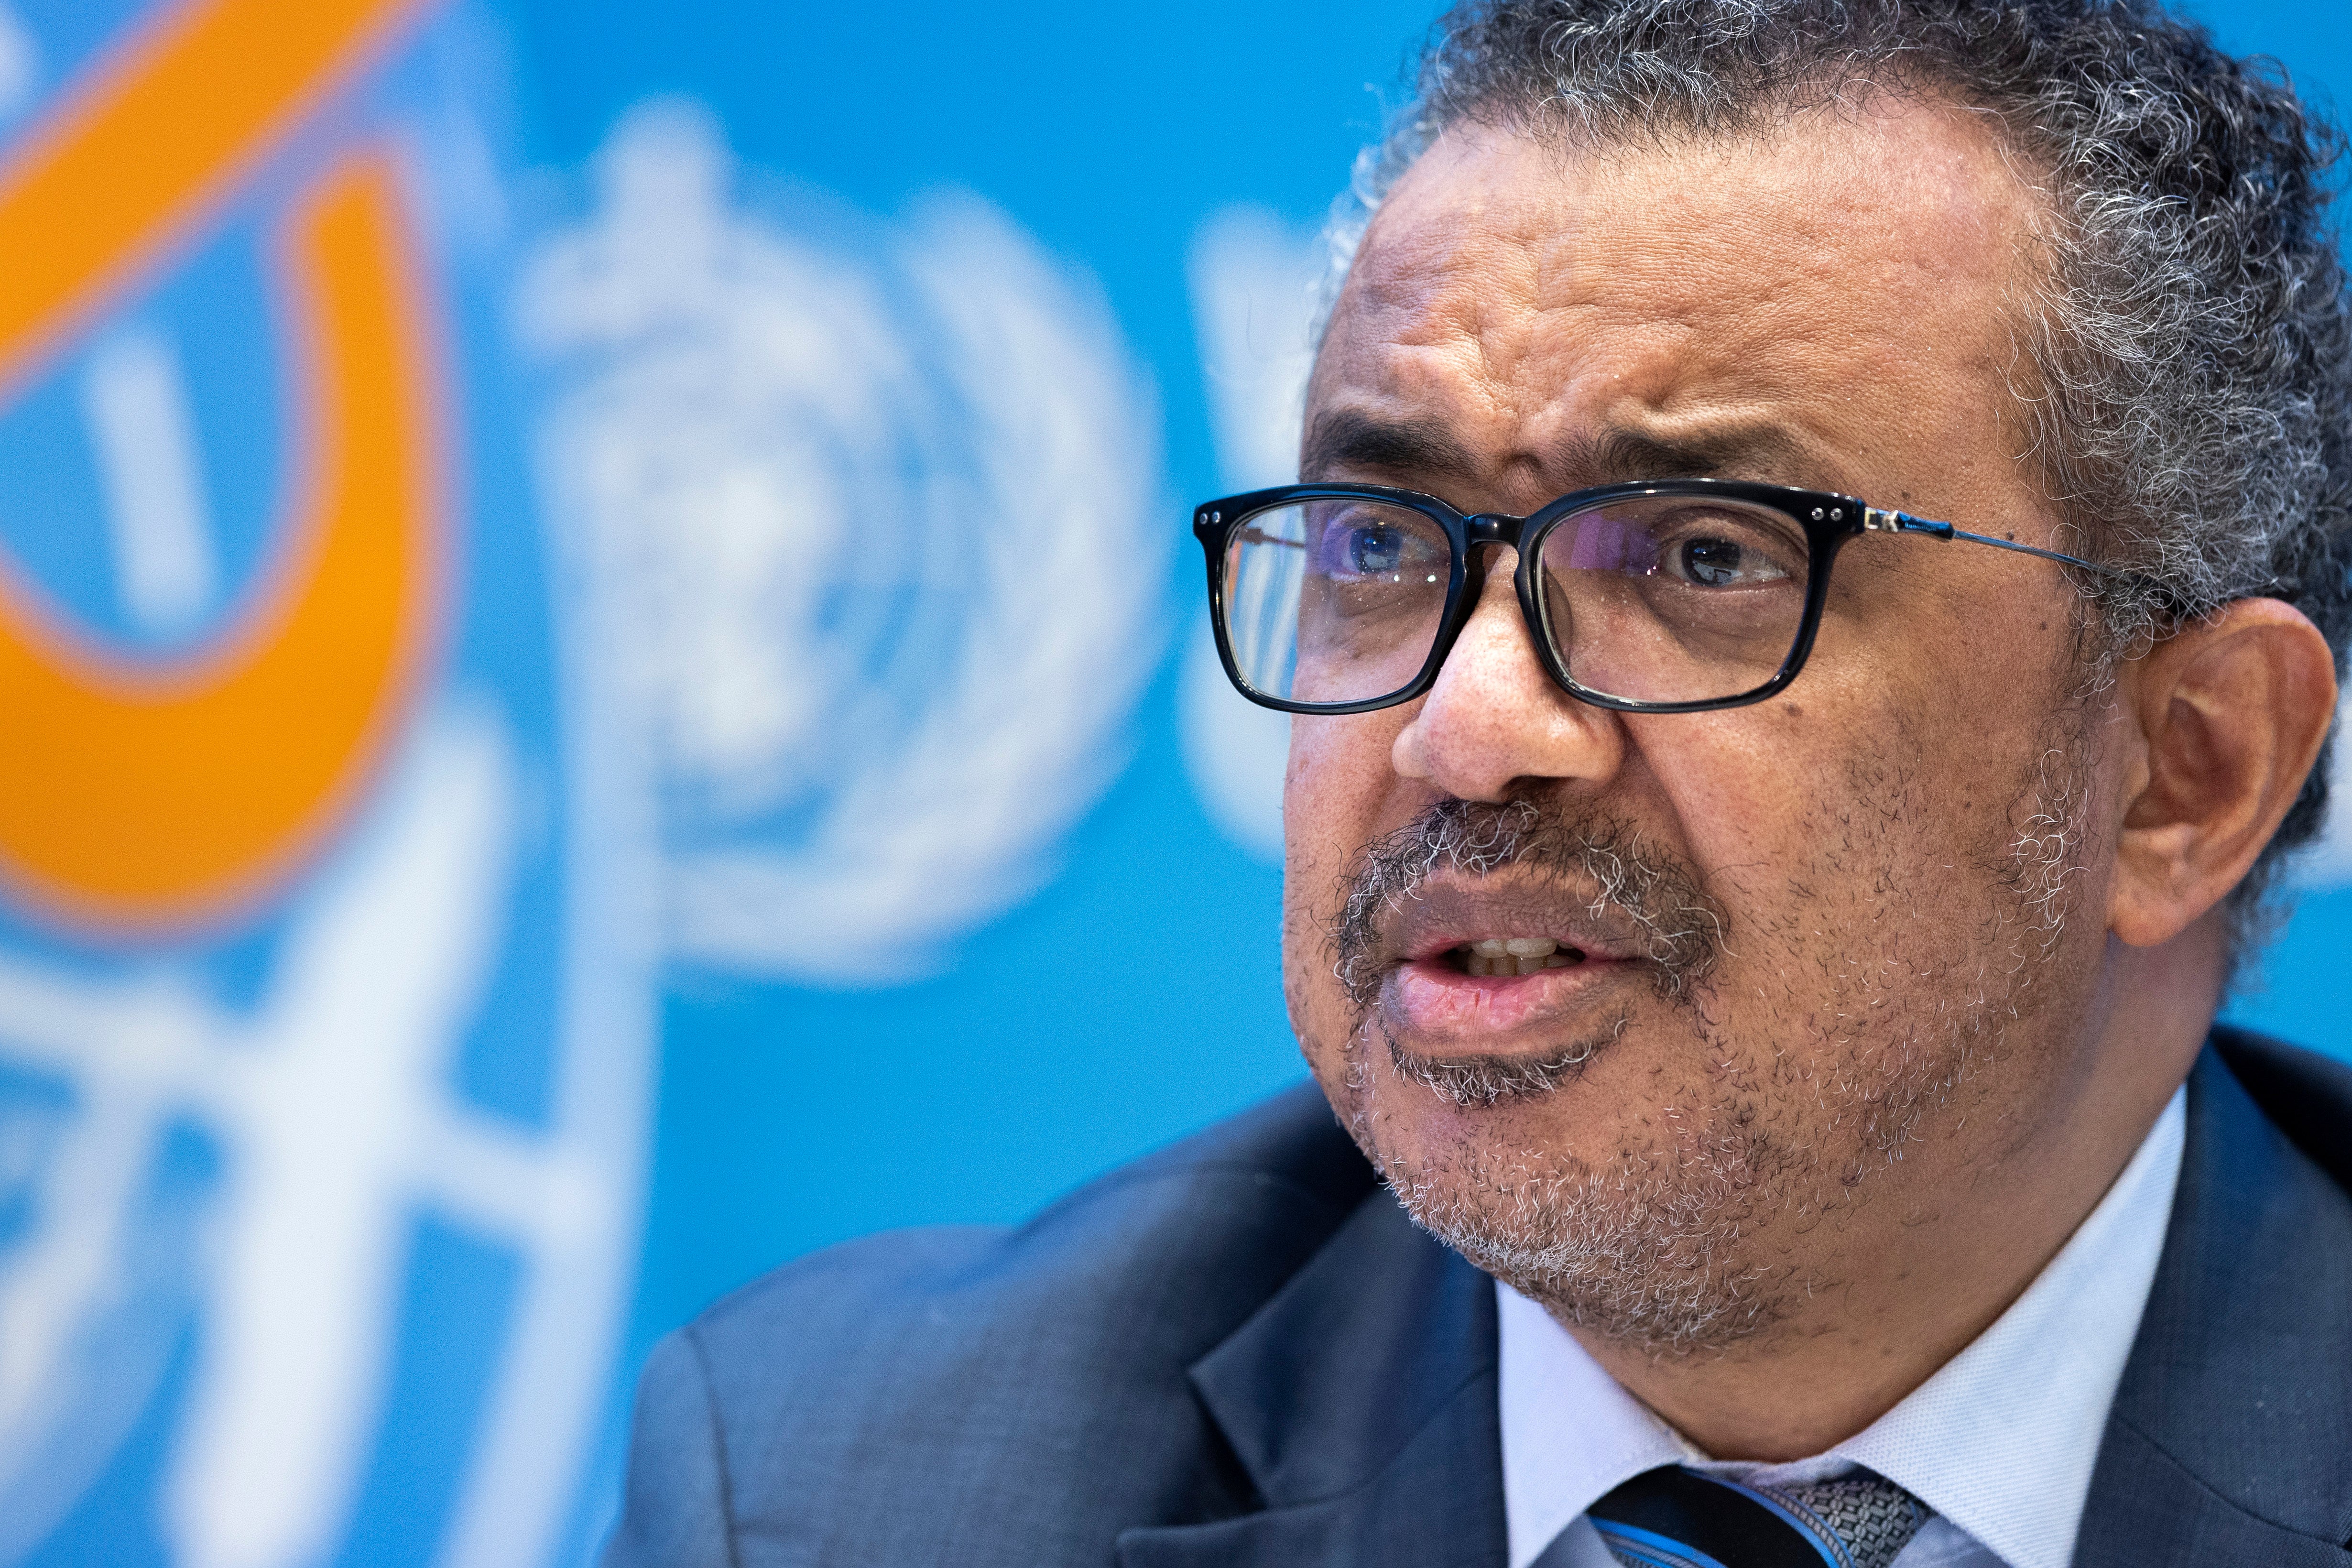 Tedros Adhanom Ghebreyesus has spoken out over the conflict for a second time in recent days